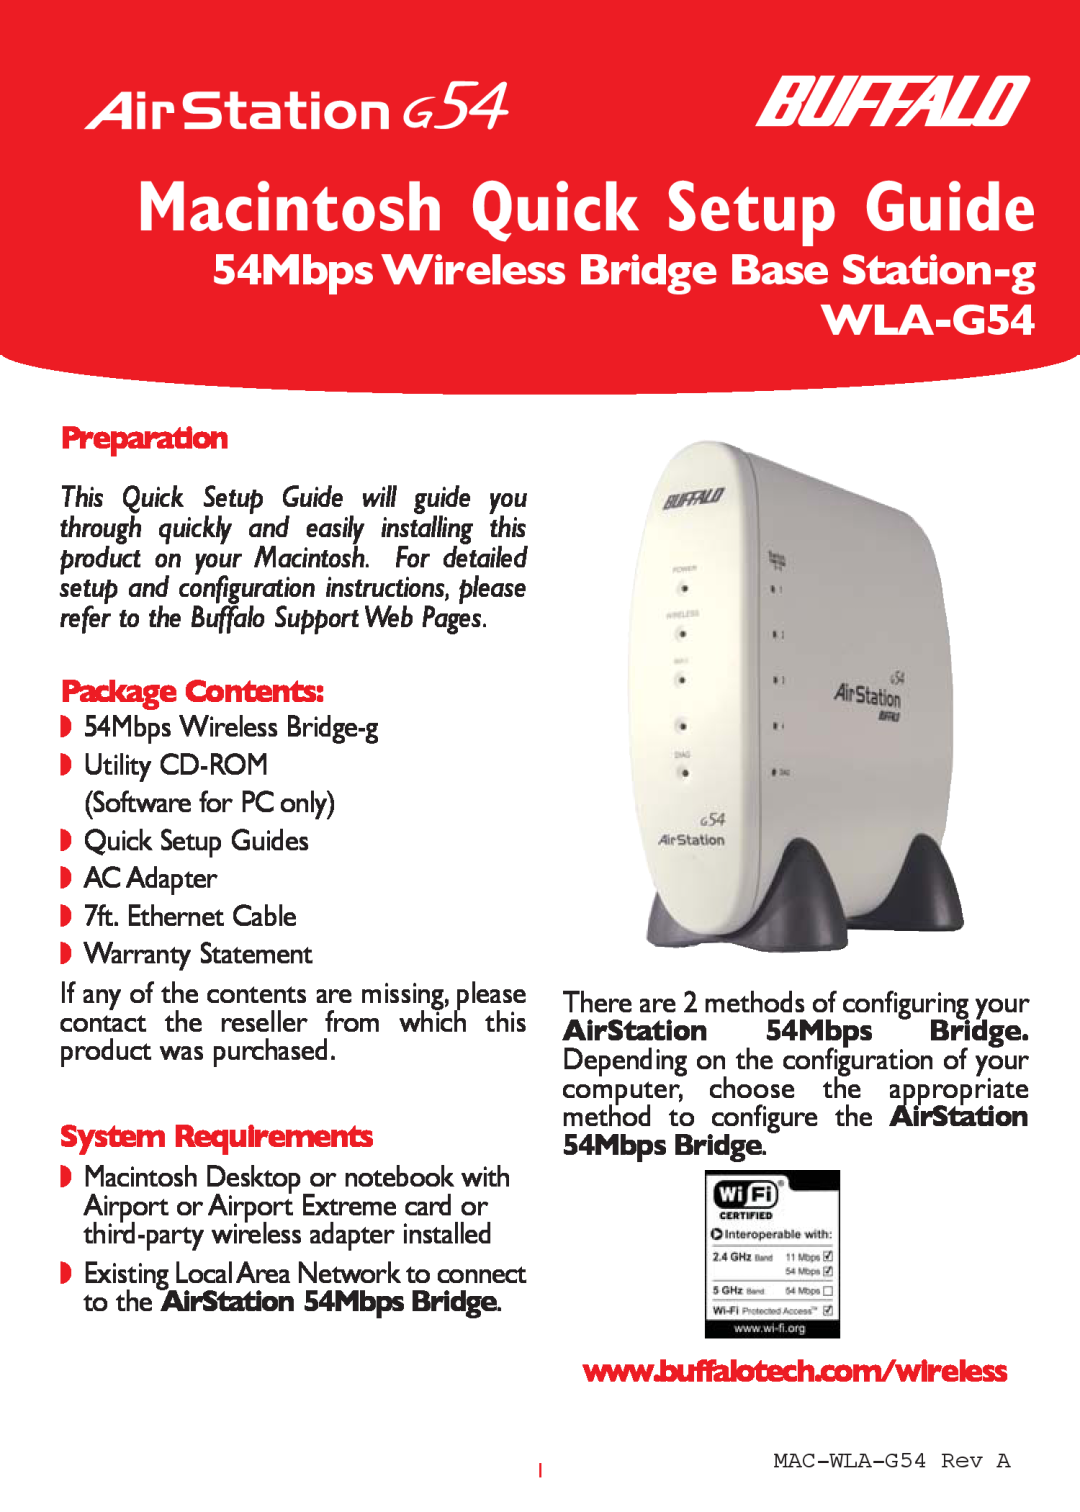 Buffalo Technology WLA-G54 manual Preparation, Package Contents, System Requirements, Quick Setup Guide 